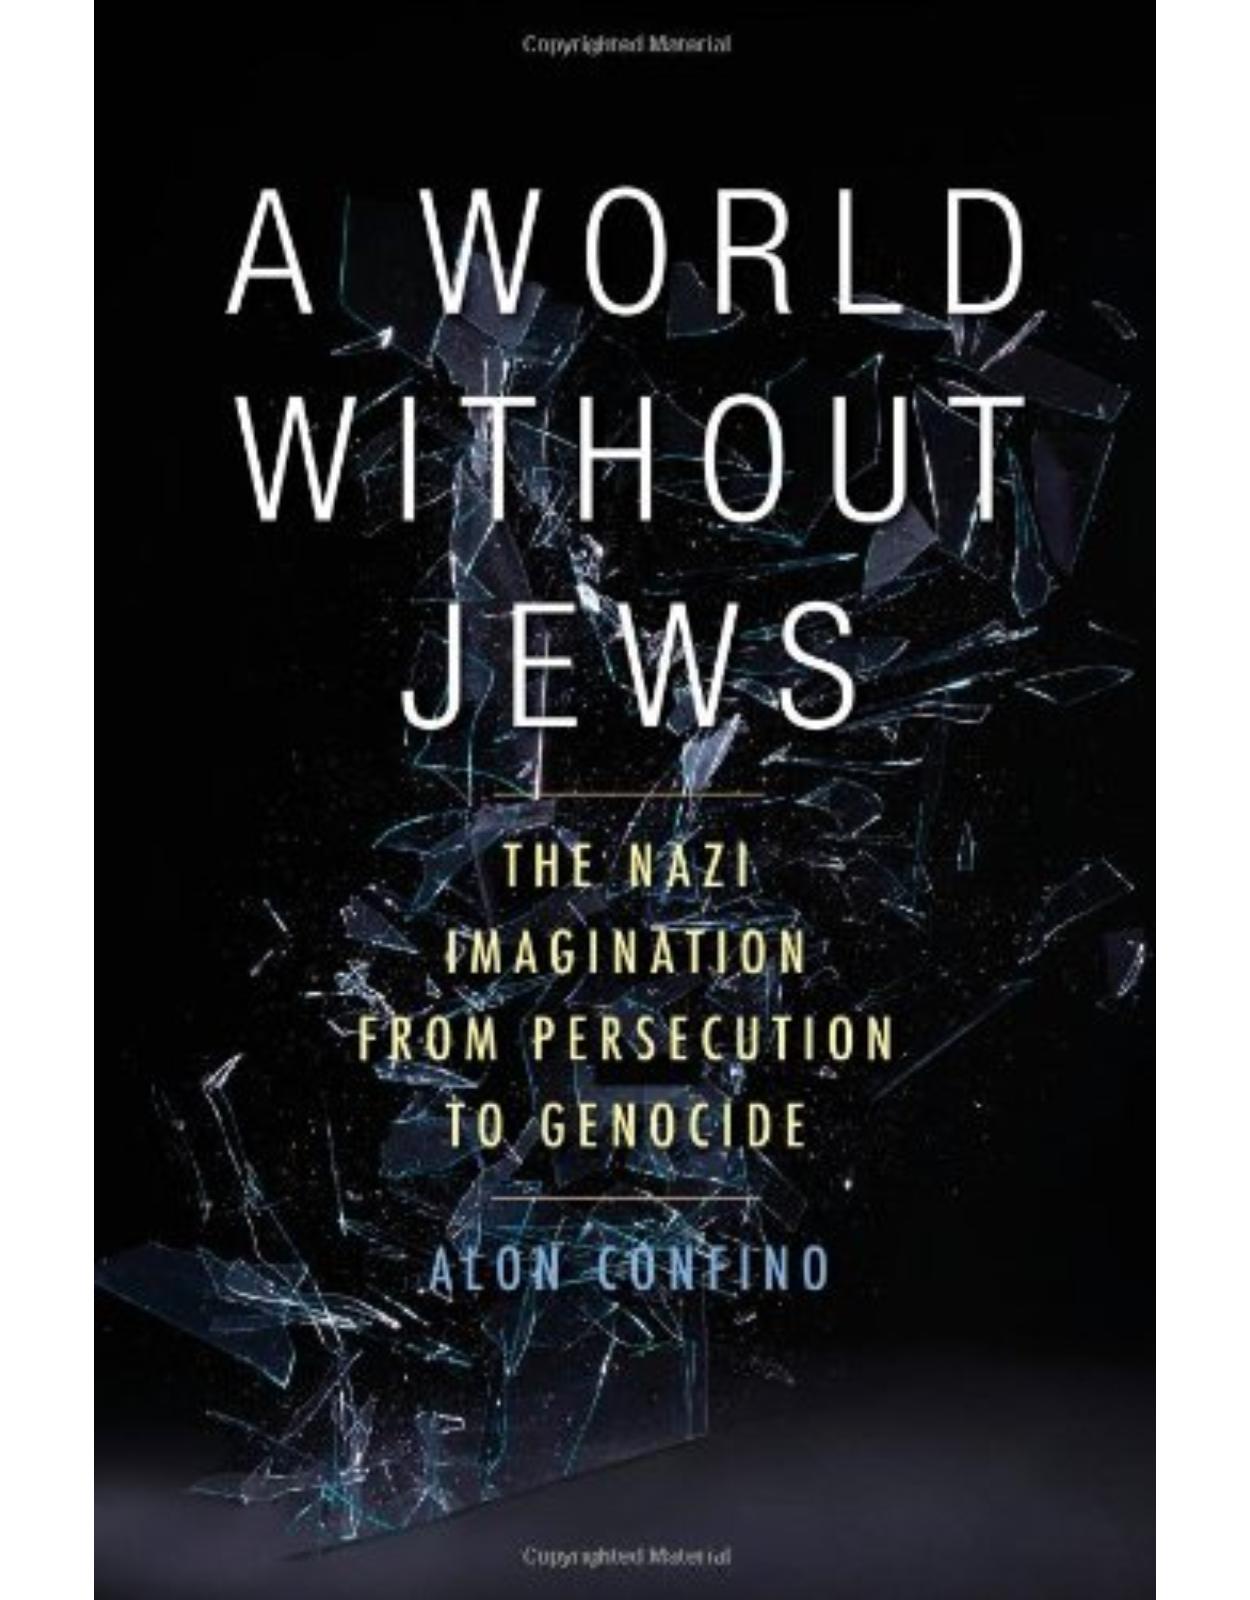 World Without Jews. Nazi Germany, Representations of the Past, and the Holocaust, 1933-1945